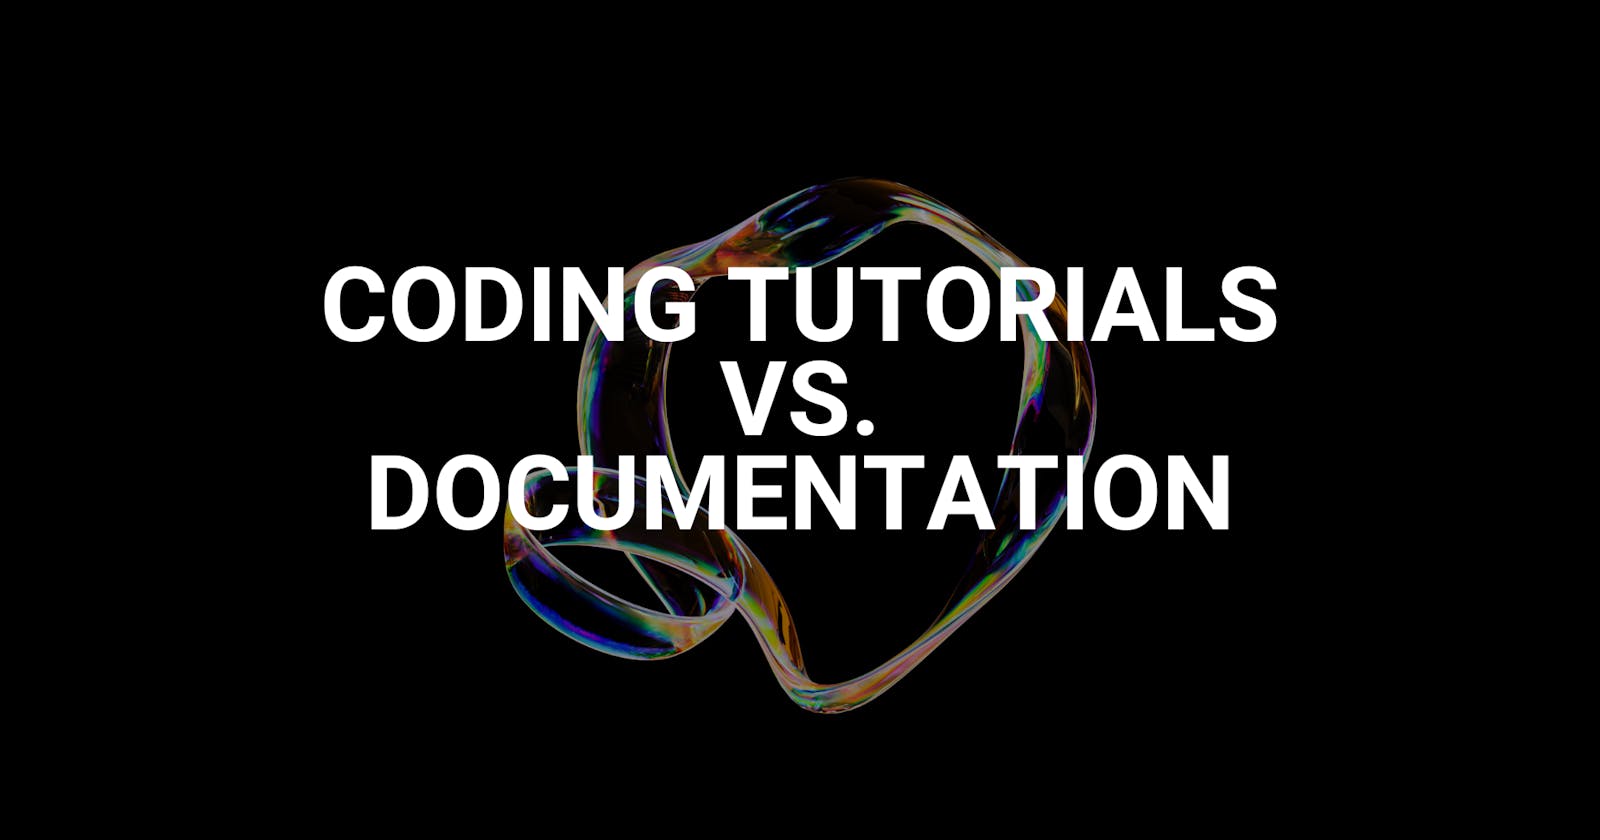 Coding Tutorials vs. Documentation: Which is Better for Learning?